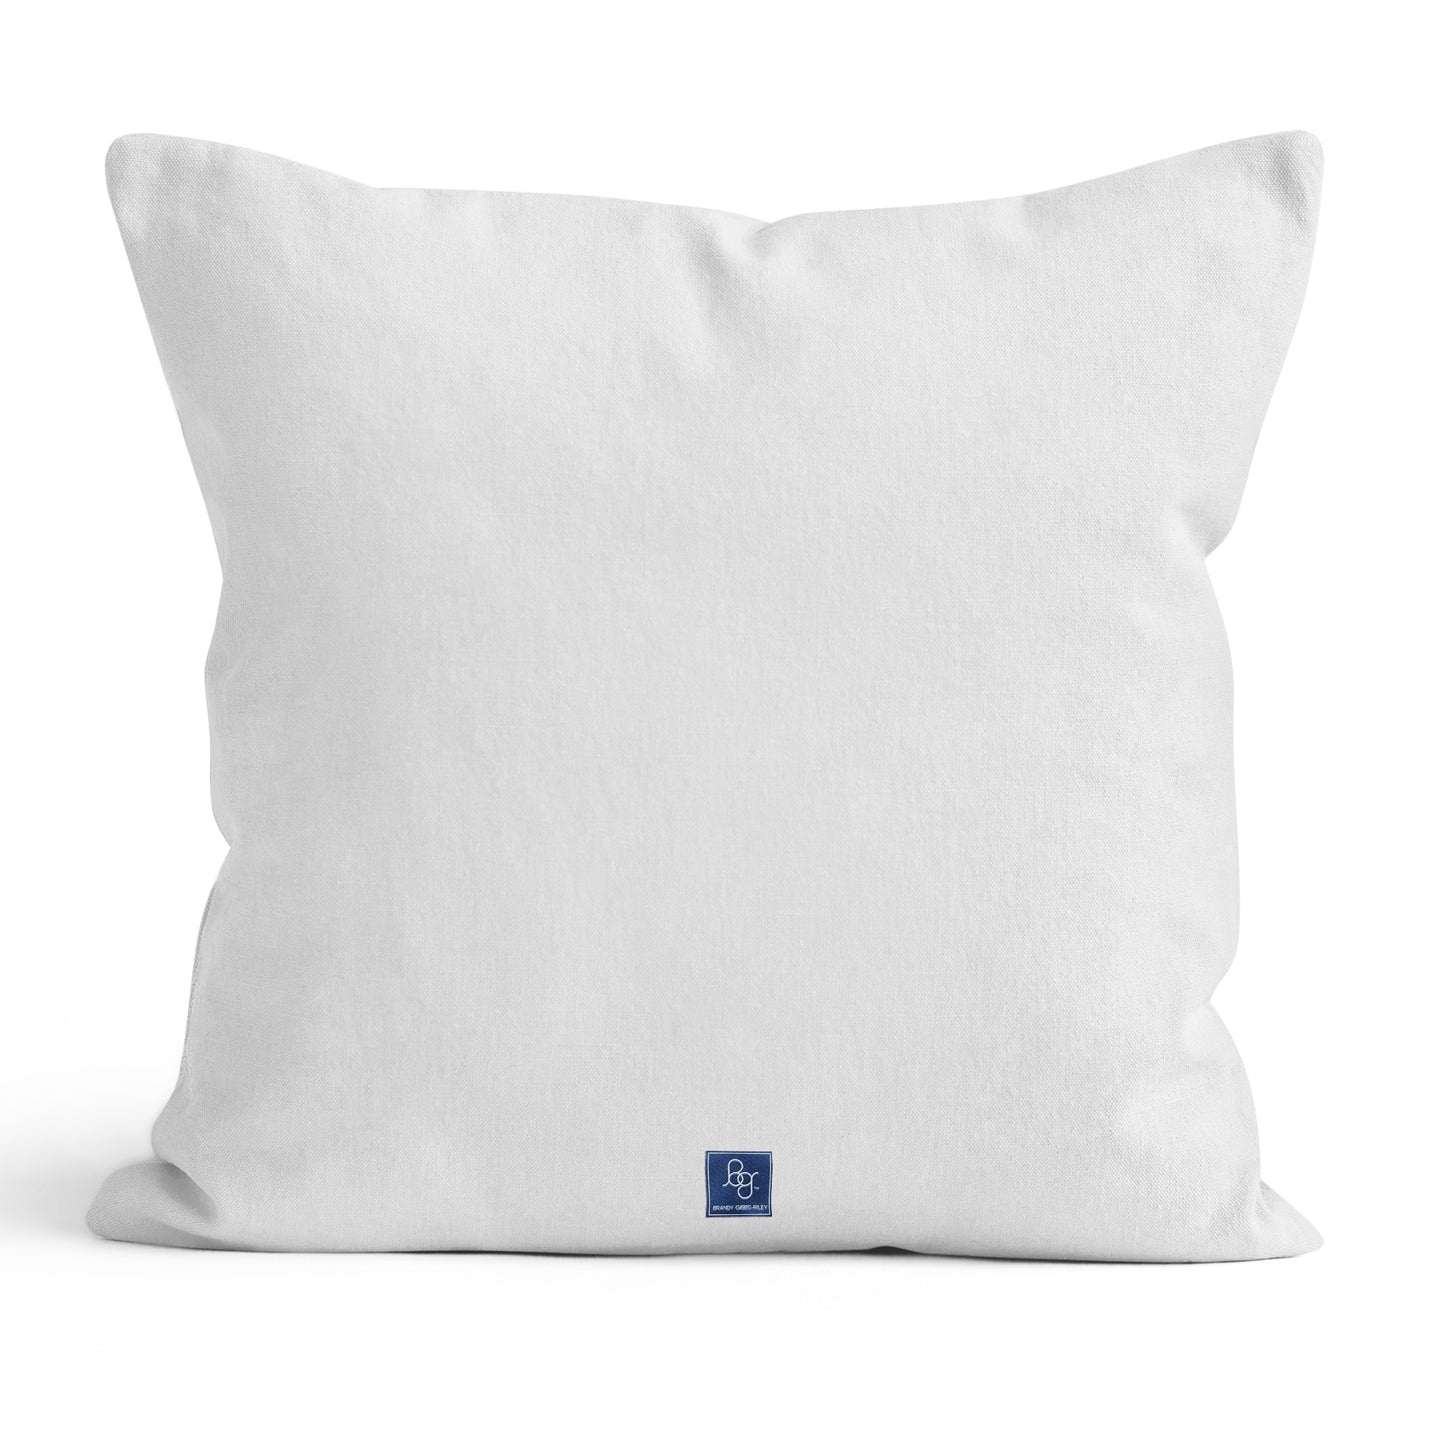 Solid white back of pillow with navy blue square label